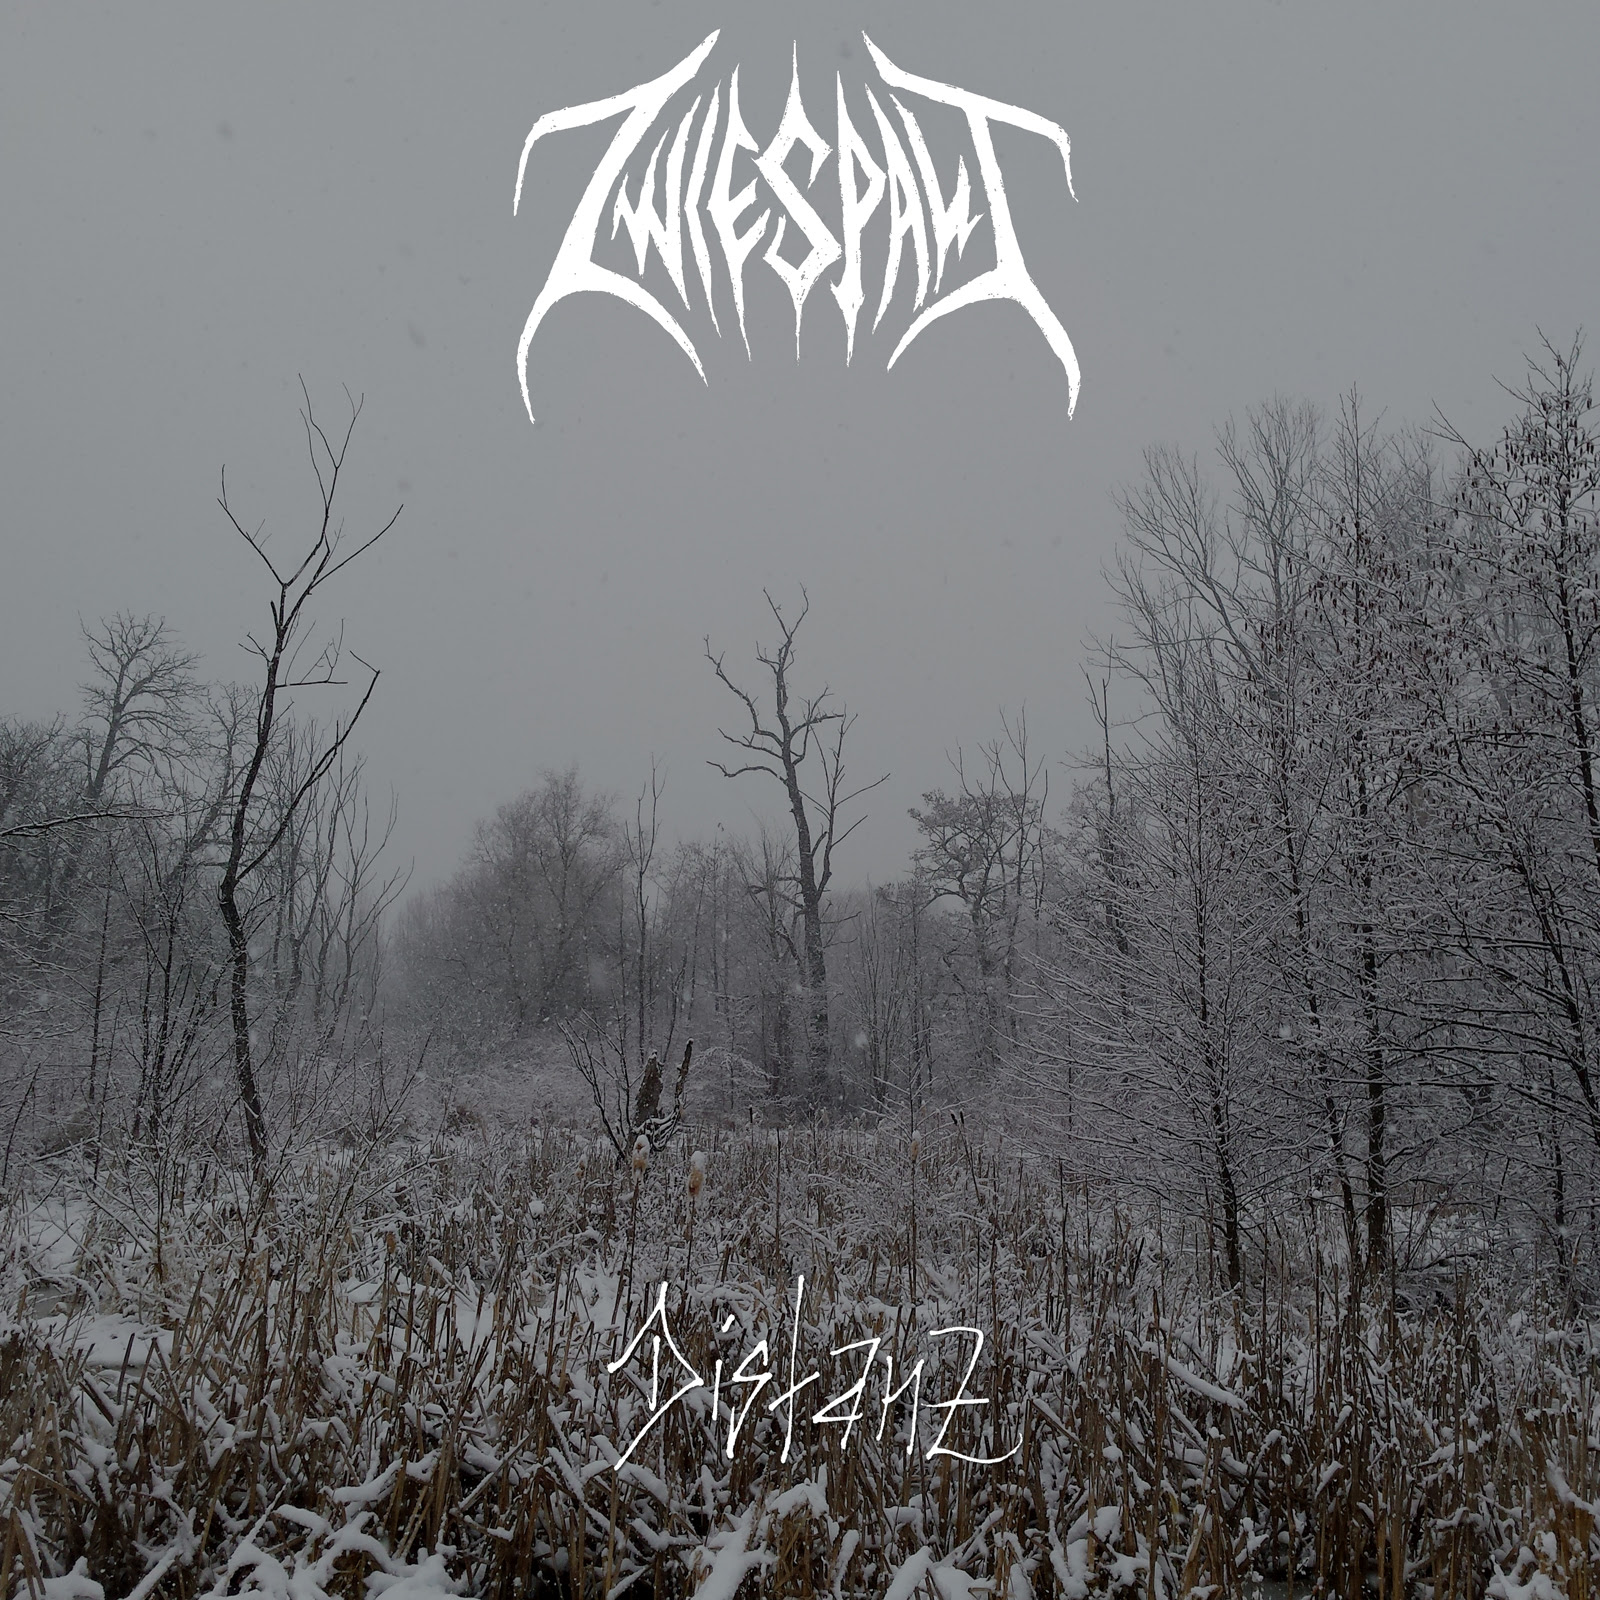 You are currently viewing ZWIESPALT released a new lyric video for the track “Frost”.